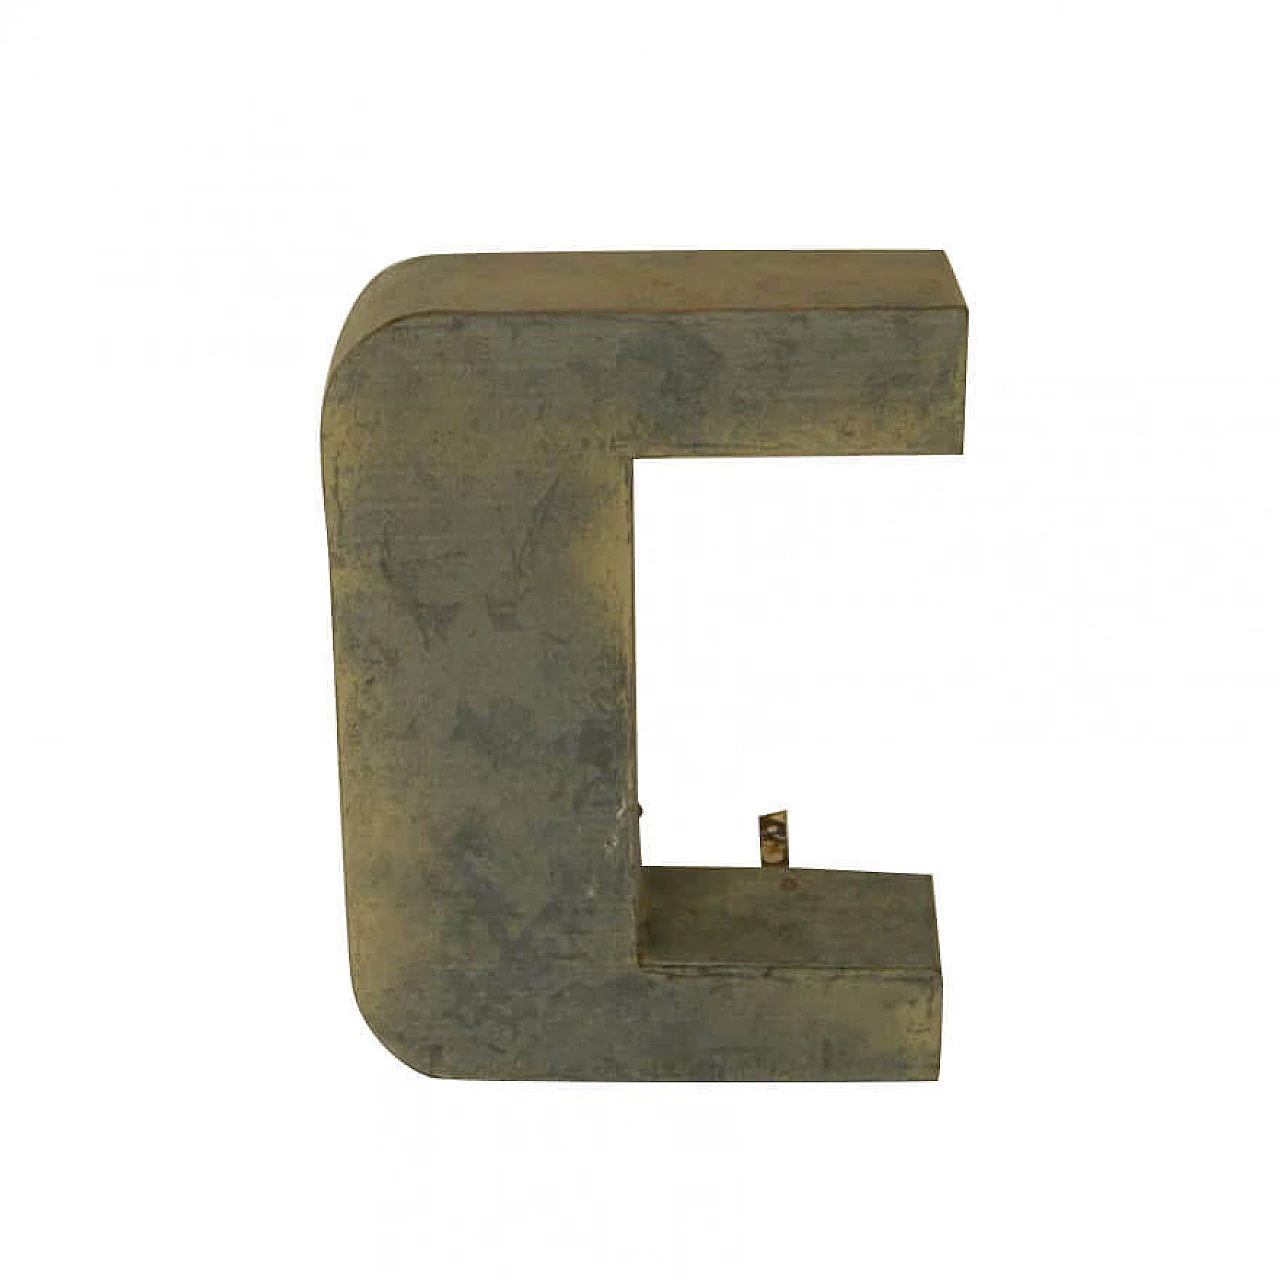 Wall decor capital letter C made in tin, 70s 1102468